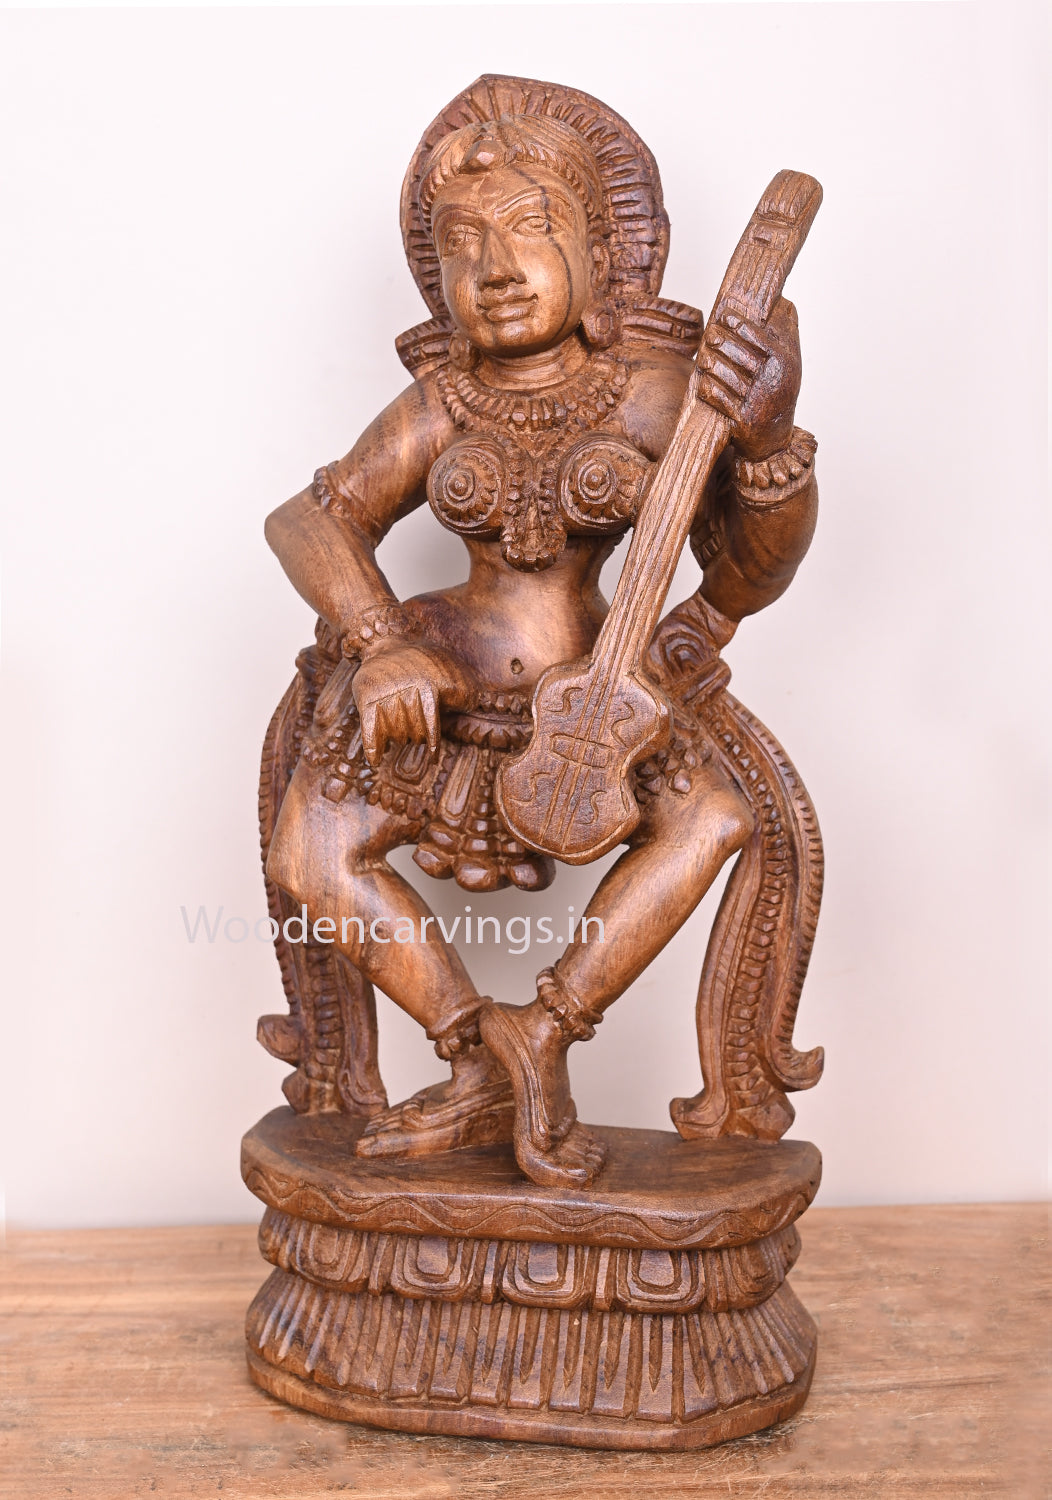 Outstanding Gorgeous Lady Apsara Holding Violin Wax Brown Handmade Wooden Home Decor Sculpture 20"